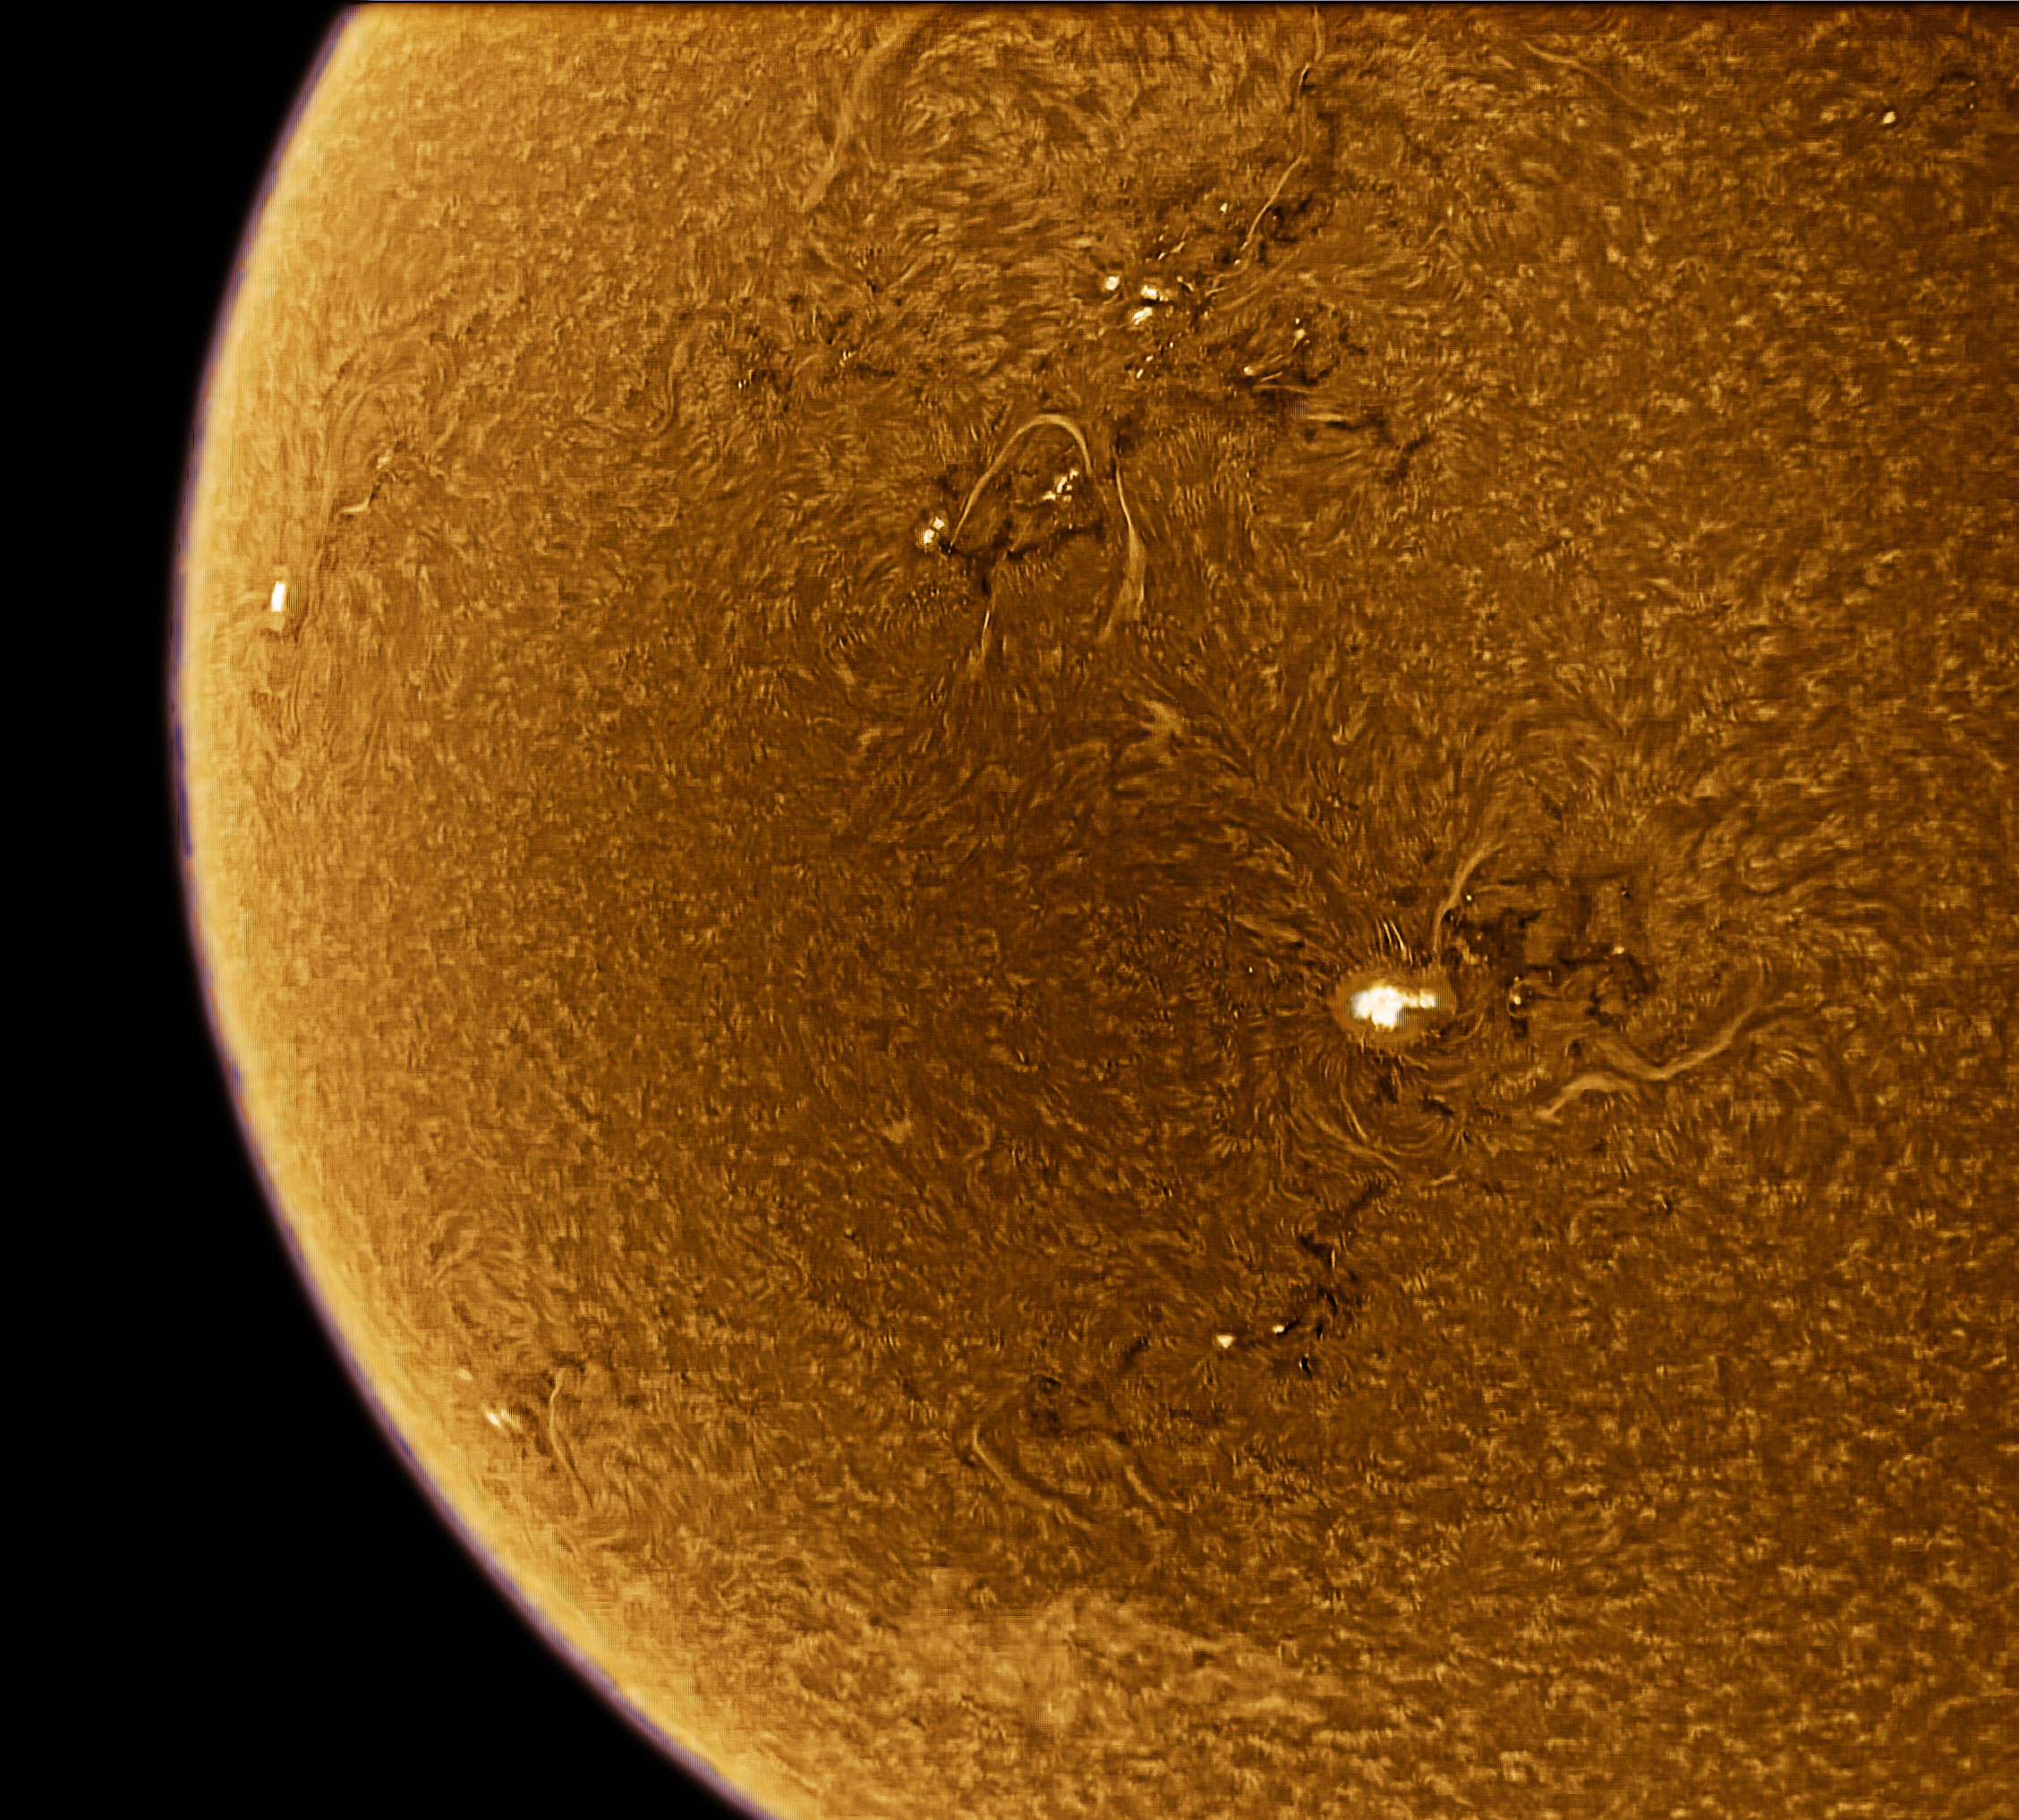 Image of the sun photographed using Lunt 152t B1800 telescope. — Photo by author